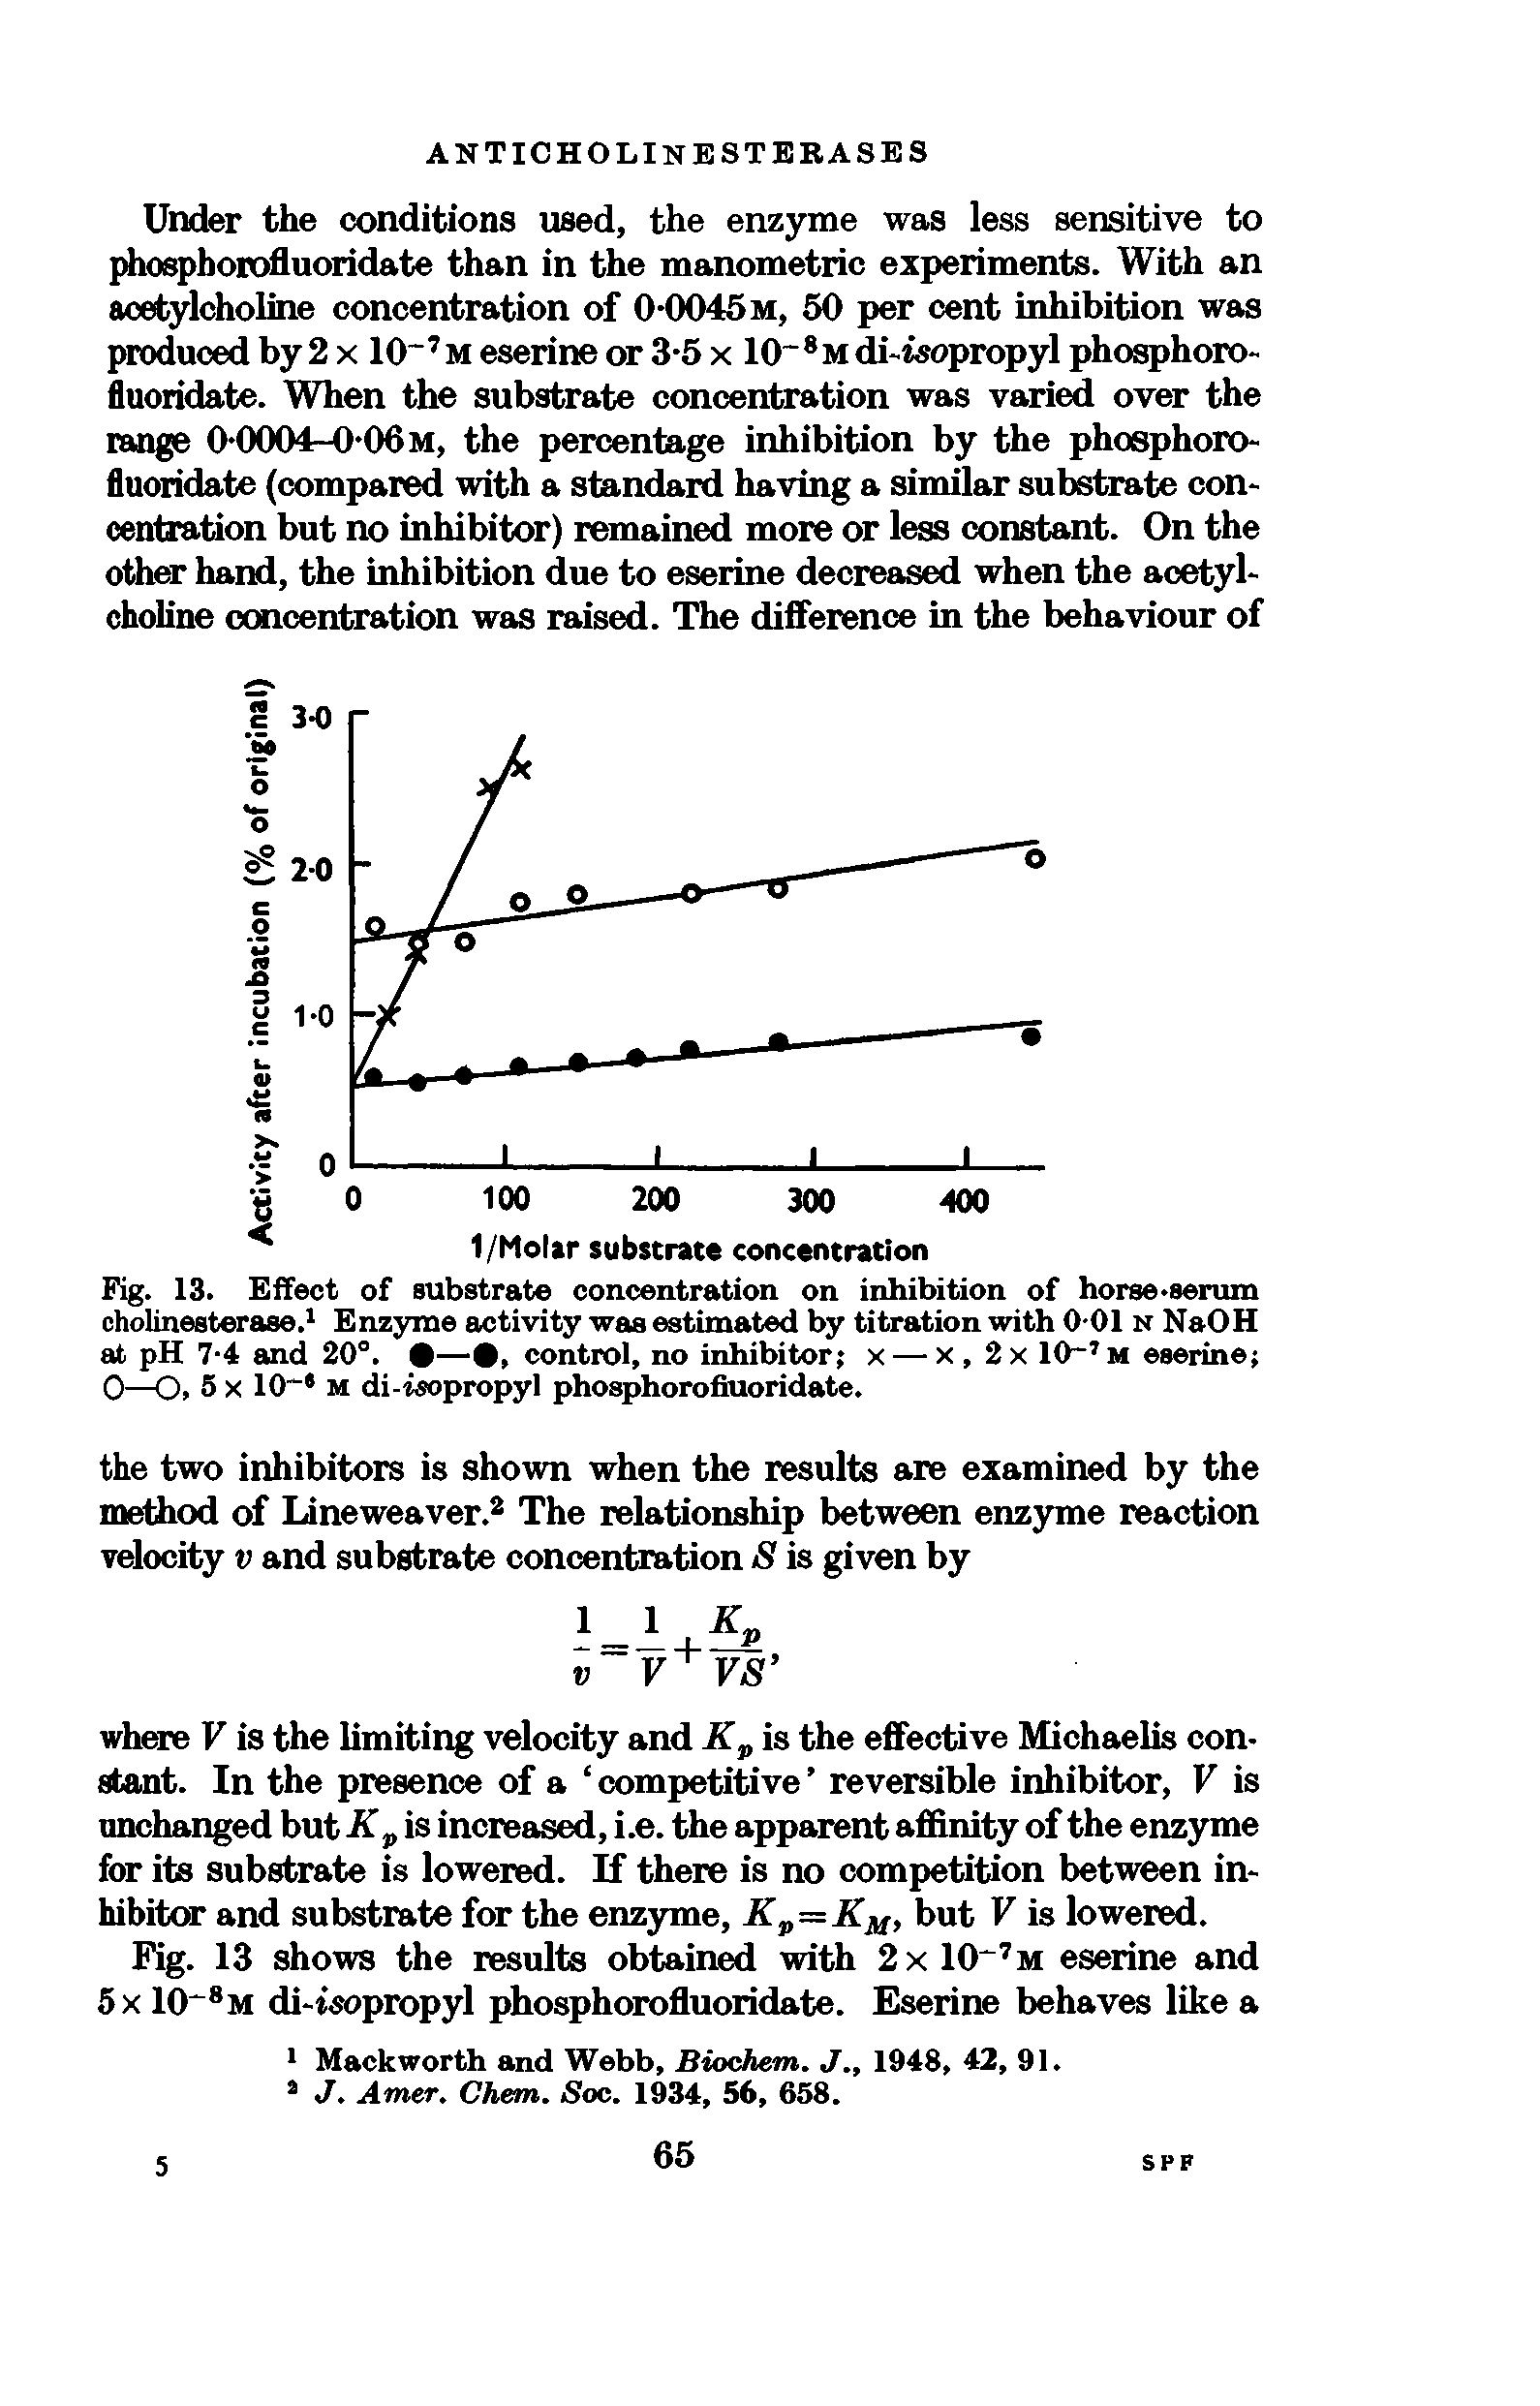 Fig. 13. Effect of substrate concentration on inhibition of horse>sermn cholinesterase. Enzyme activity was estimated by titration with 0-01 n NaOH at pH 7-4 and 20°. — , control, no inhibitor x — x, 2x 10 m eserine 0—O, 5 X 10 M di-isopropyl phosphorofiuoridate.